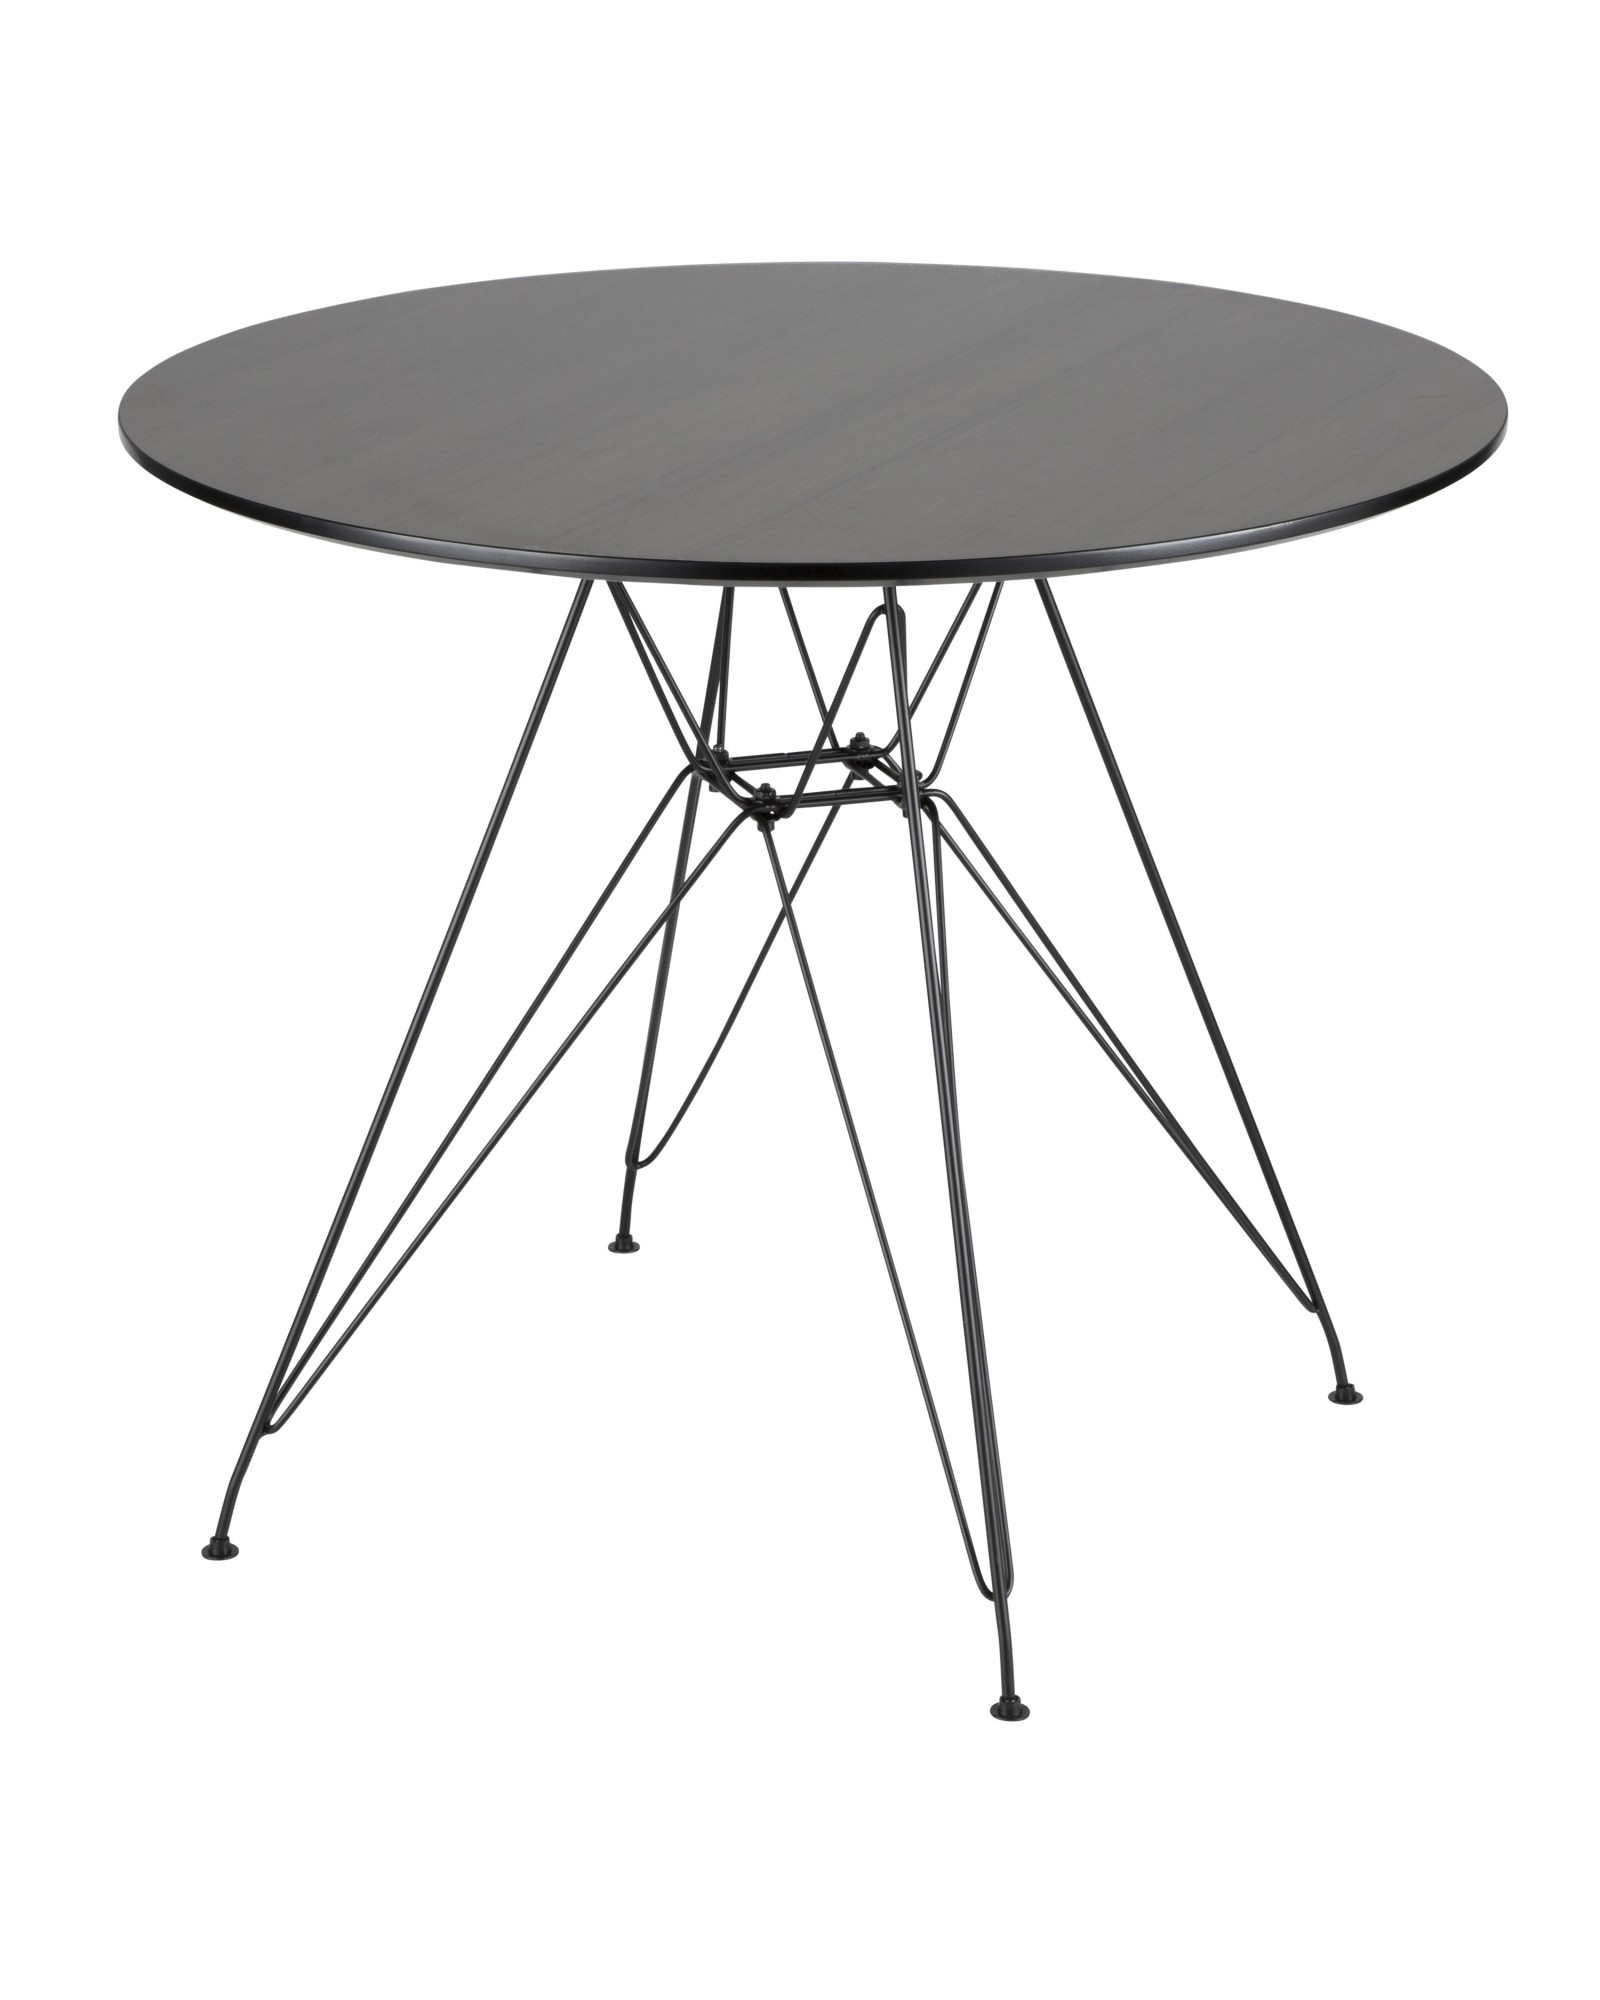 Avery Mid-Century Modern Round Dining Table in Black and Walnut